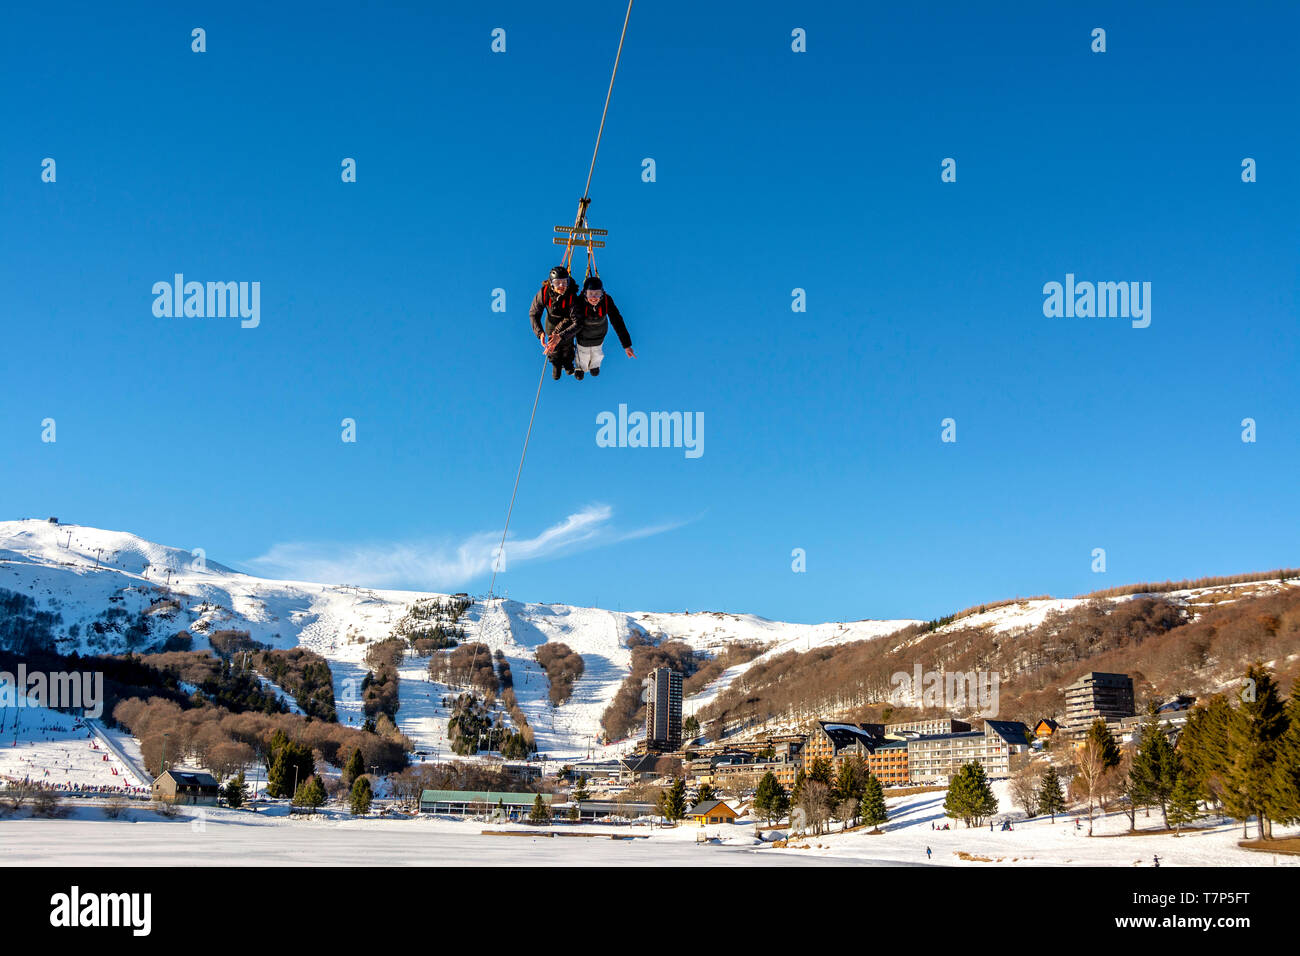 Persons on Zip wire line in Super Besse ski resort,  Regional Nature Park of Volcans d'Auvergne, Puy de Dome, Auvergne, France Stock Photo